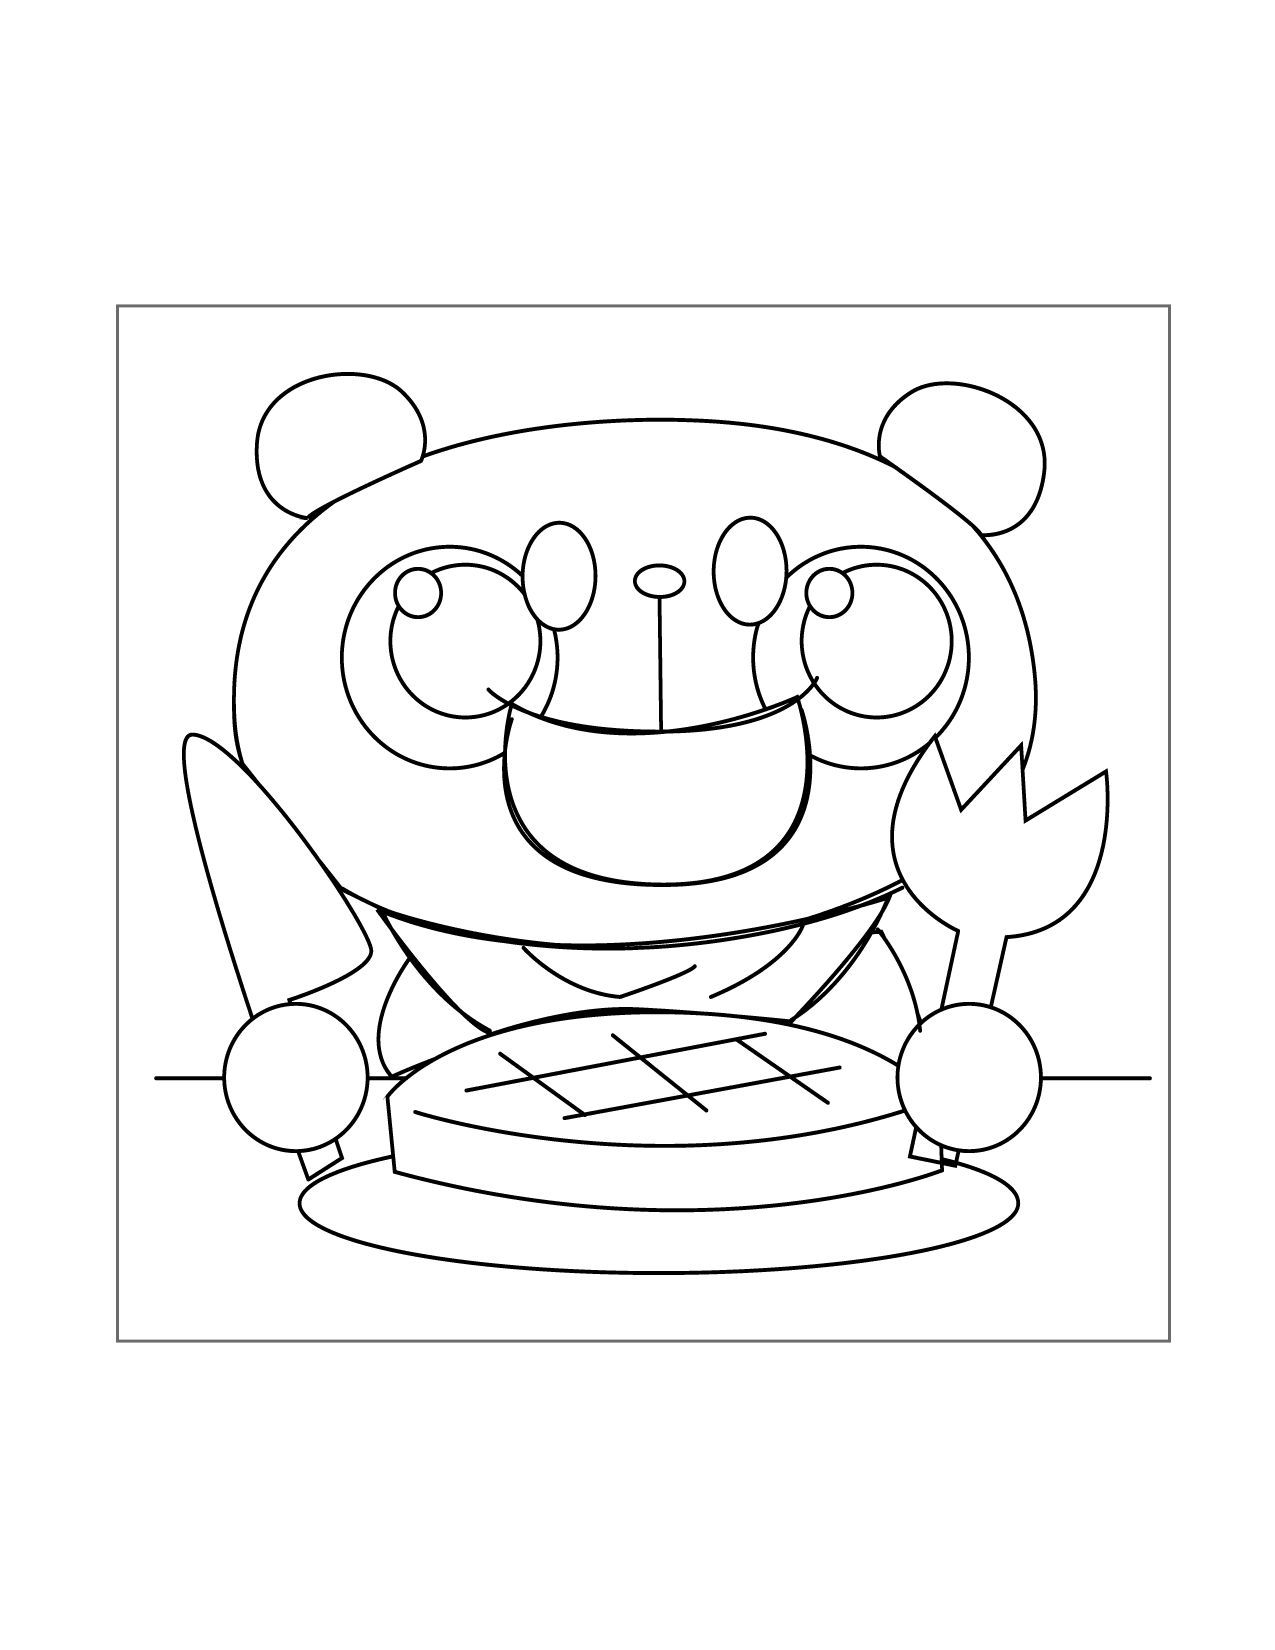 Bear Eating Breakfast Coloring Page